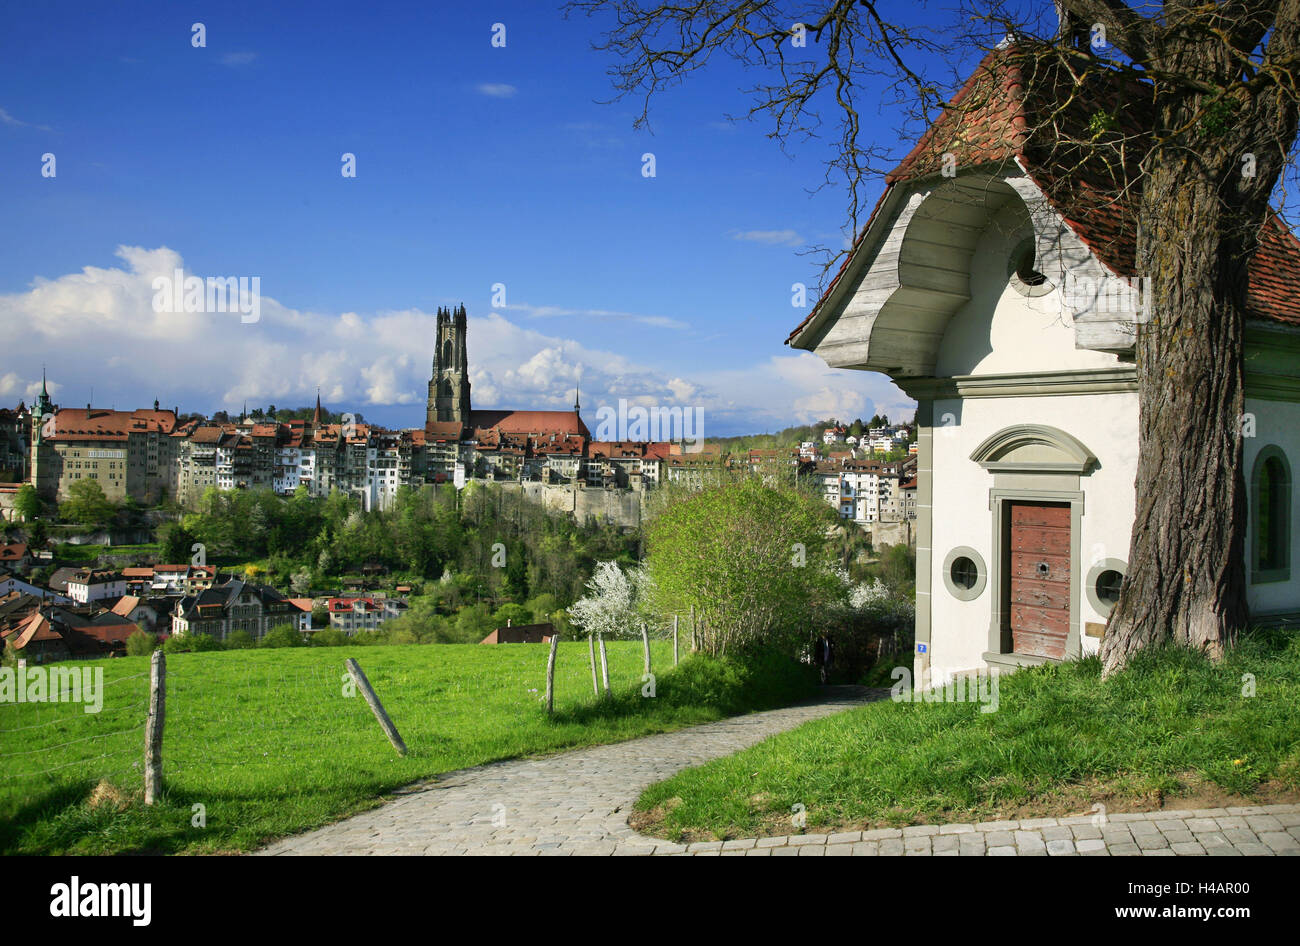 Switzerland, Fribourg on the Sarine River, chapel on the meadows of the 'Convent de Montorge', view from the Old Town of Fribourg with the Cathedral of Saint Nicholas, Stock Photo